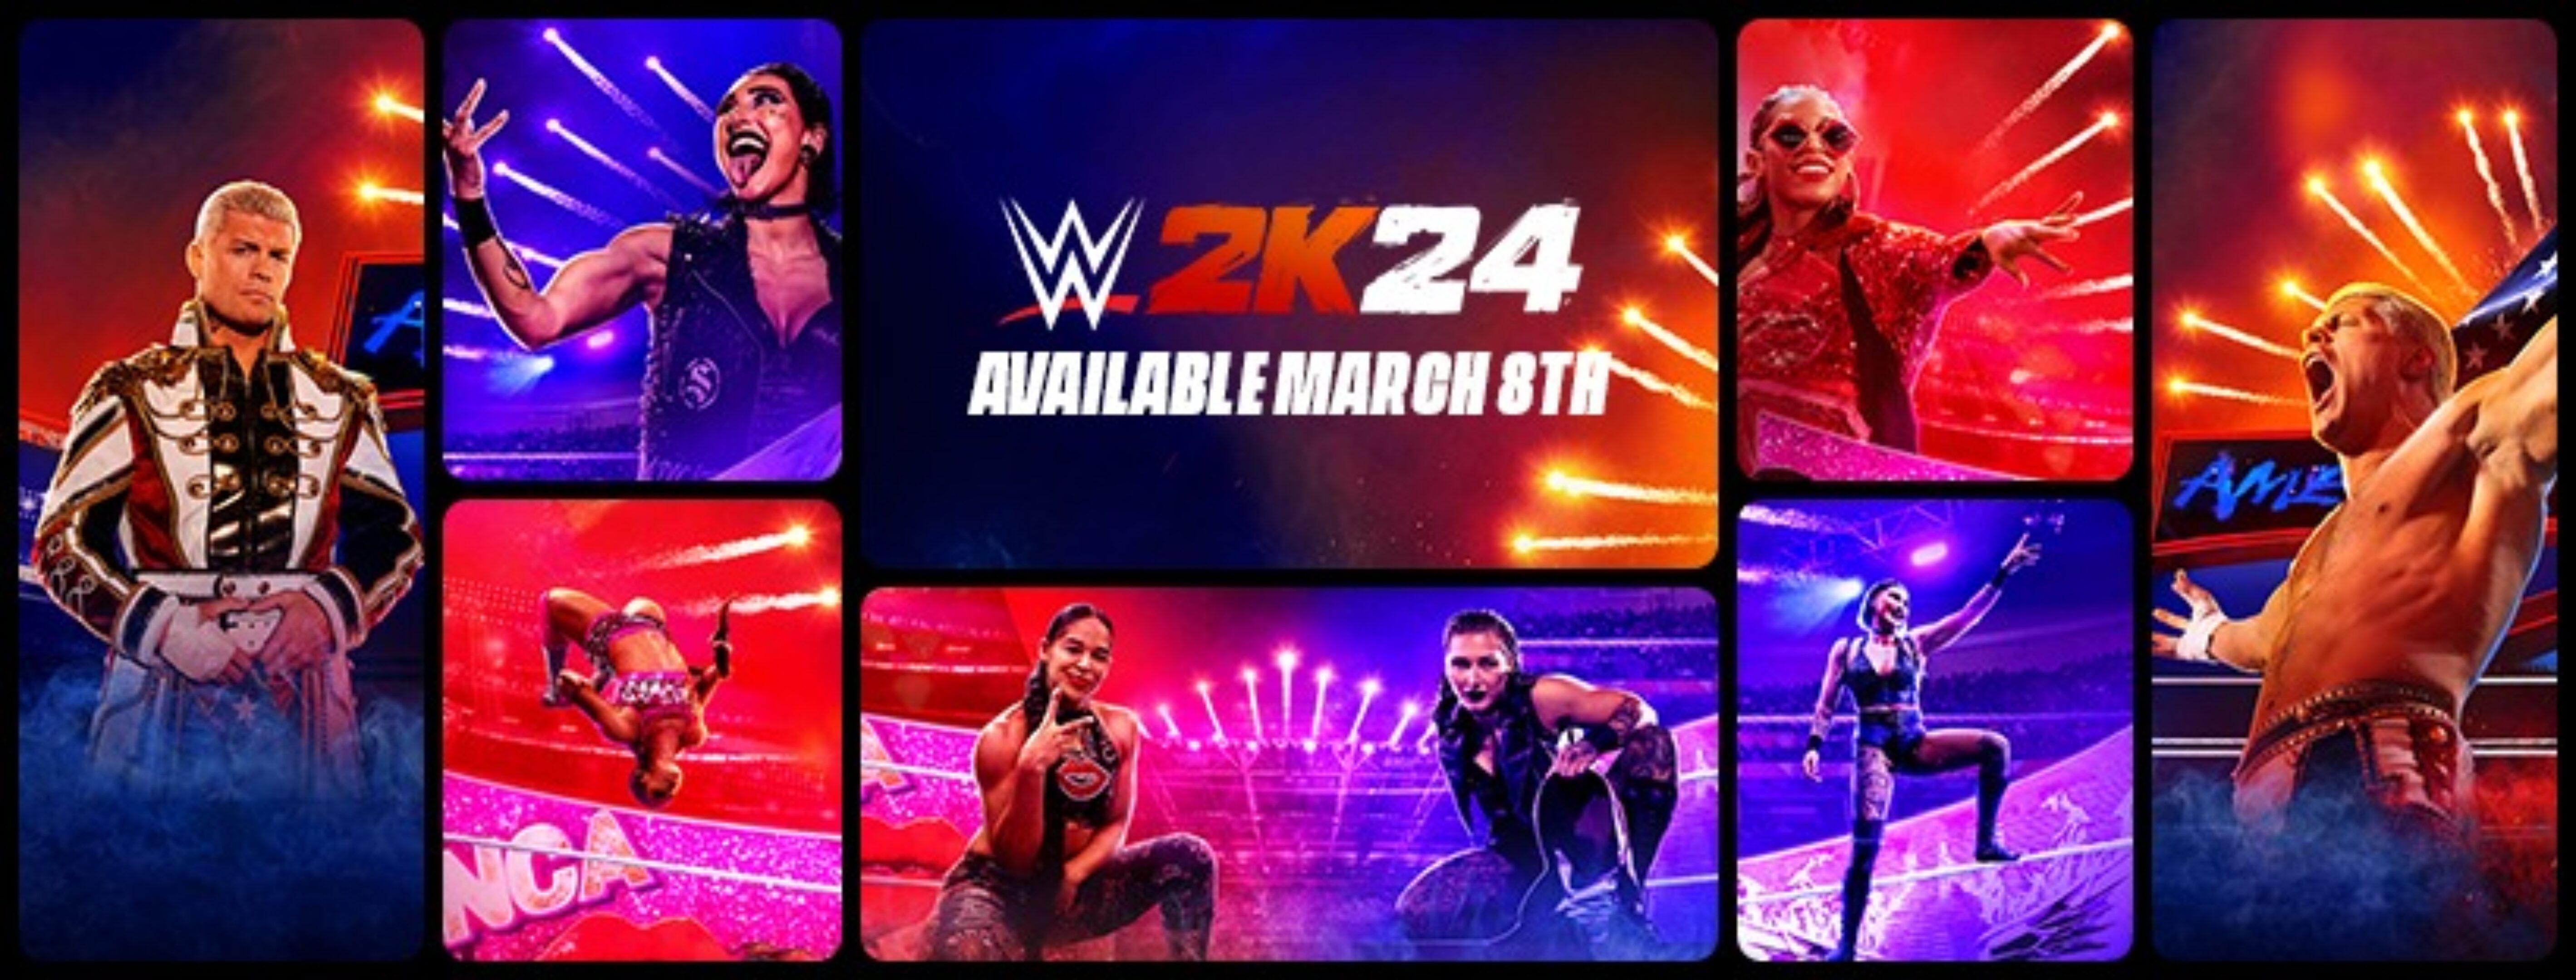 WWE 2K24 Cover and Details Revealed